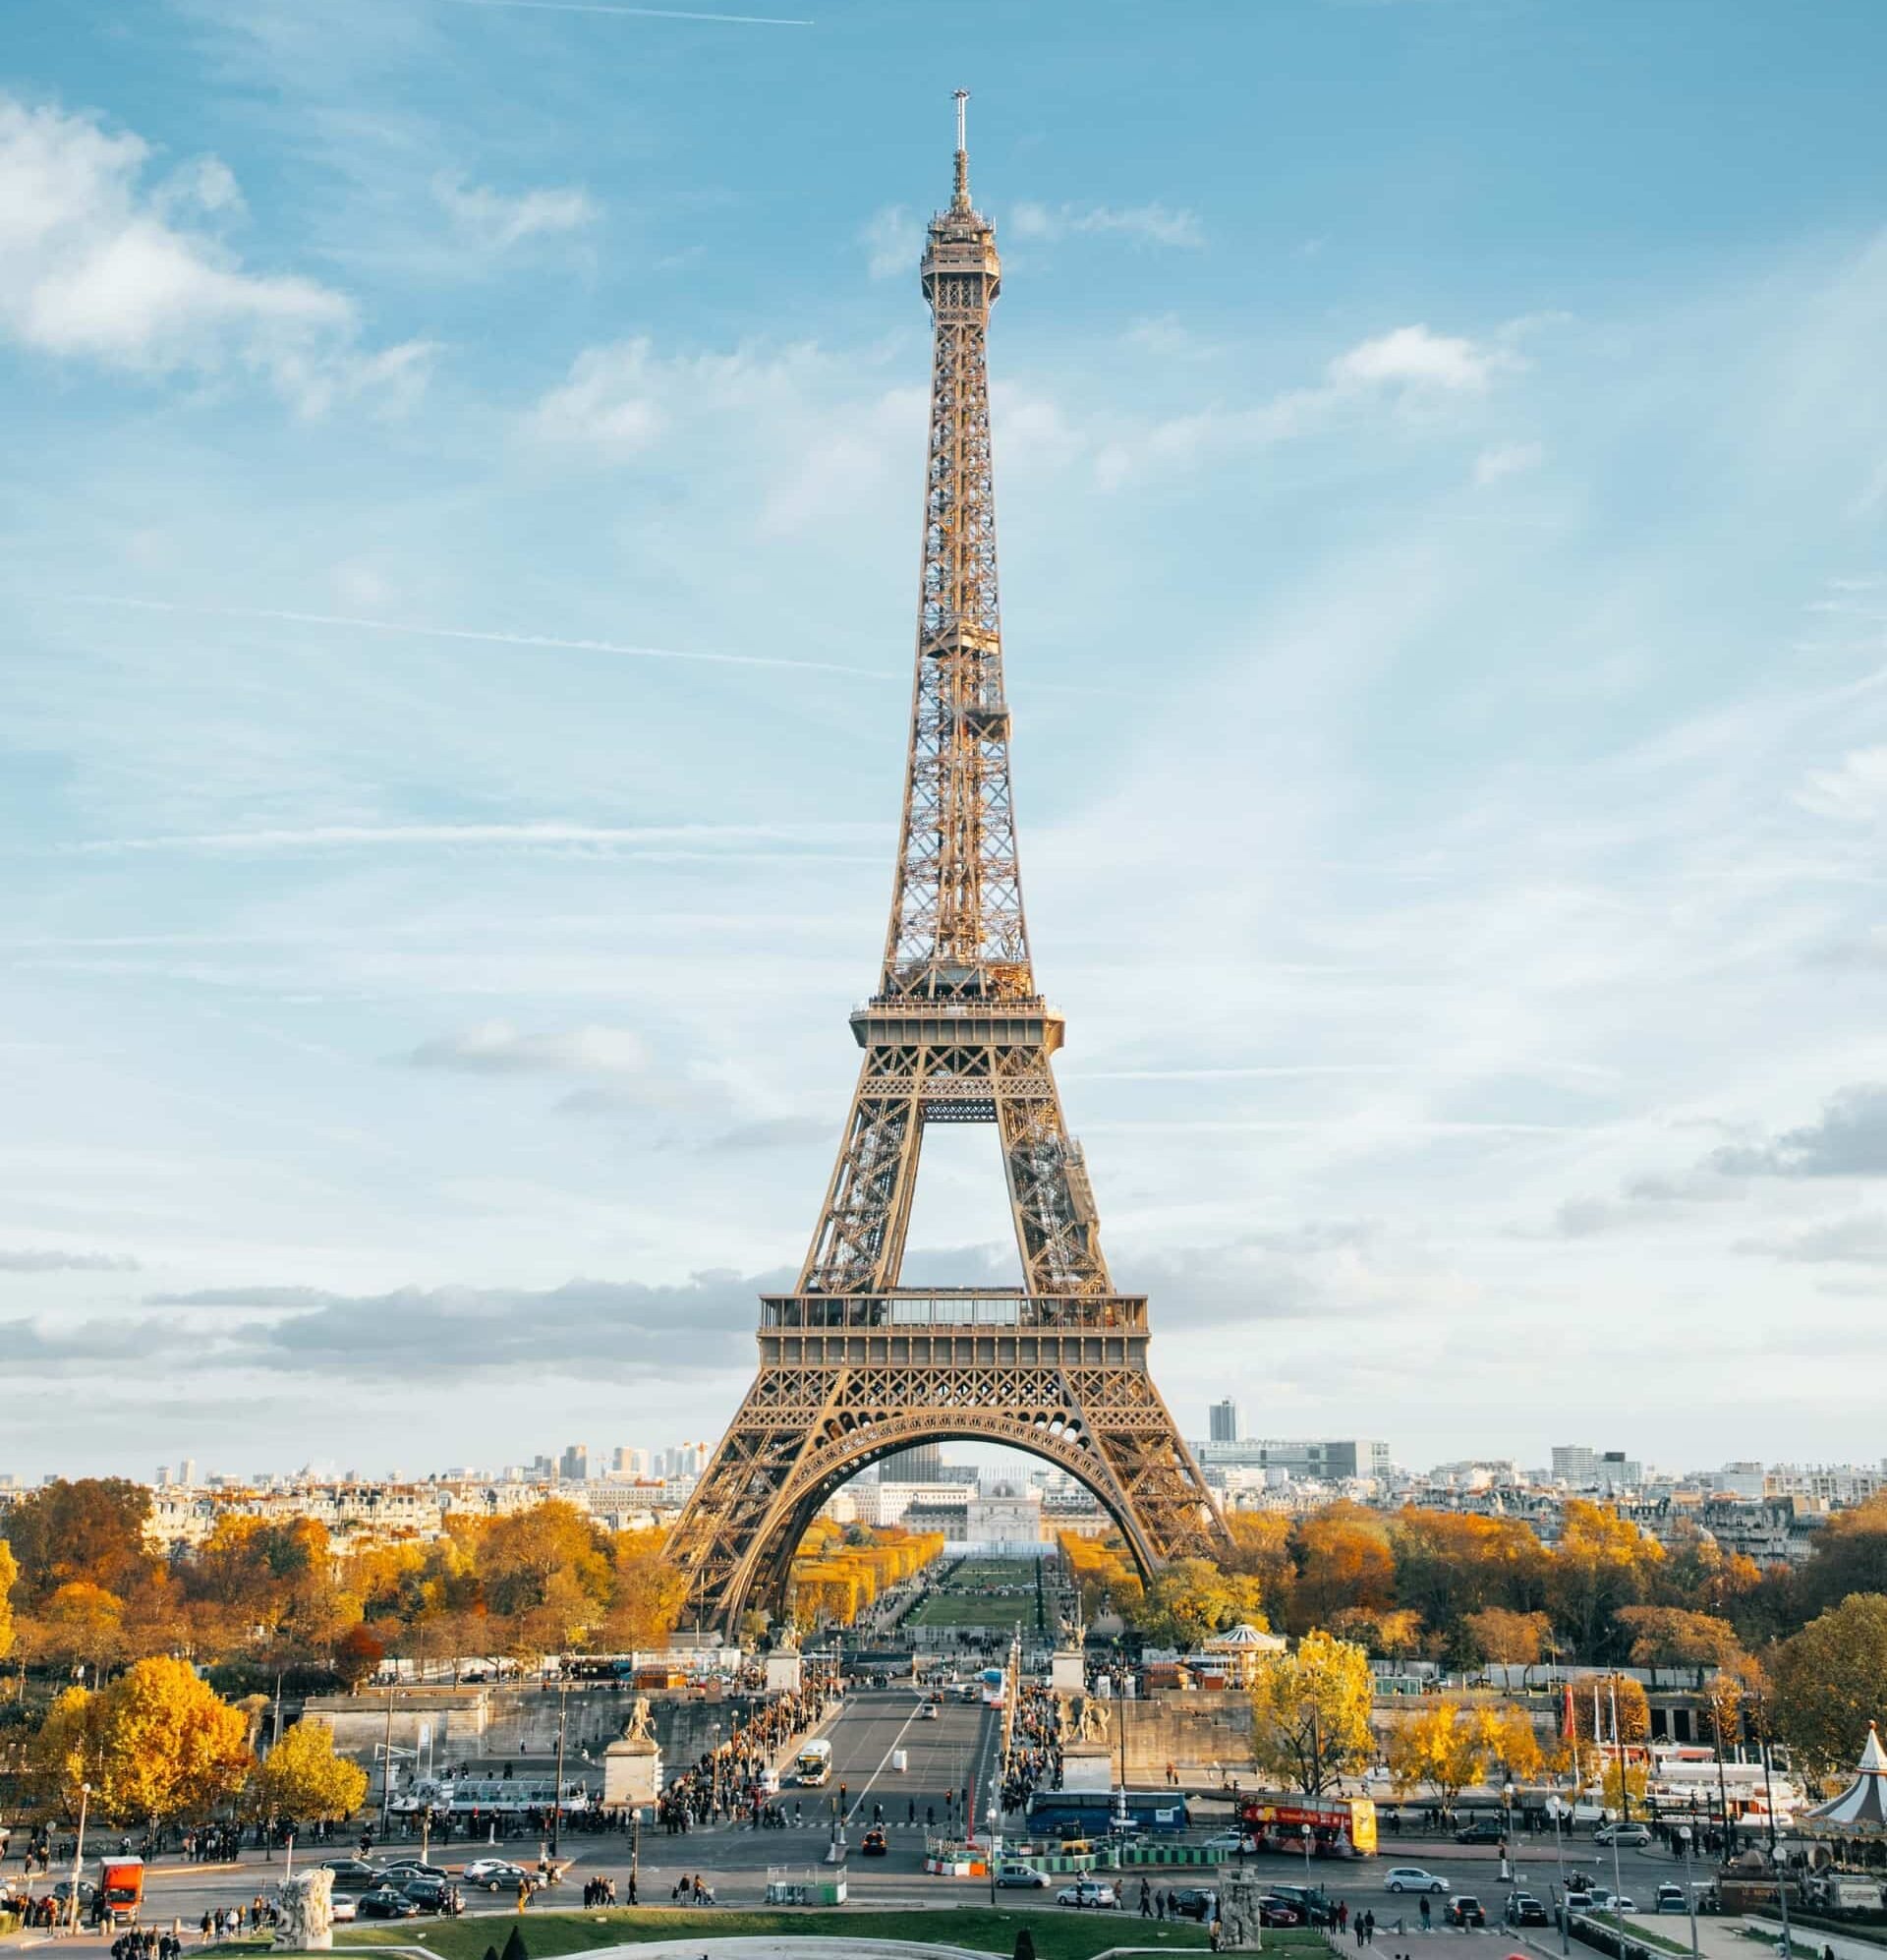 Find an au pair job in France and visit the gorgeous eiffeltower in Paris